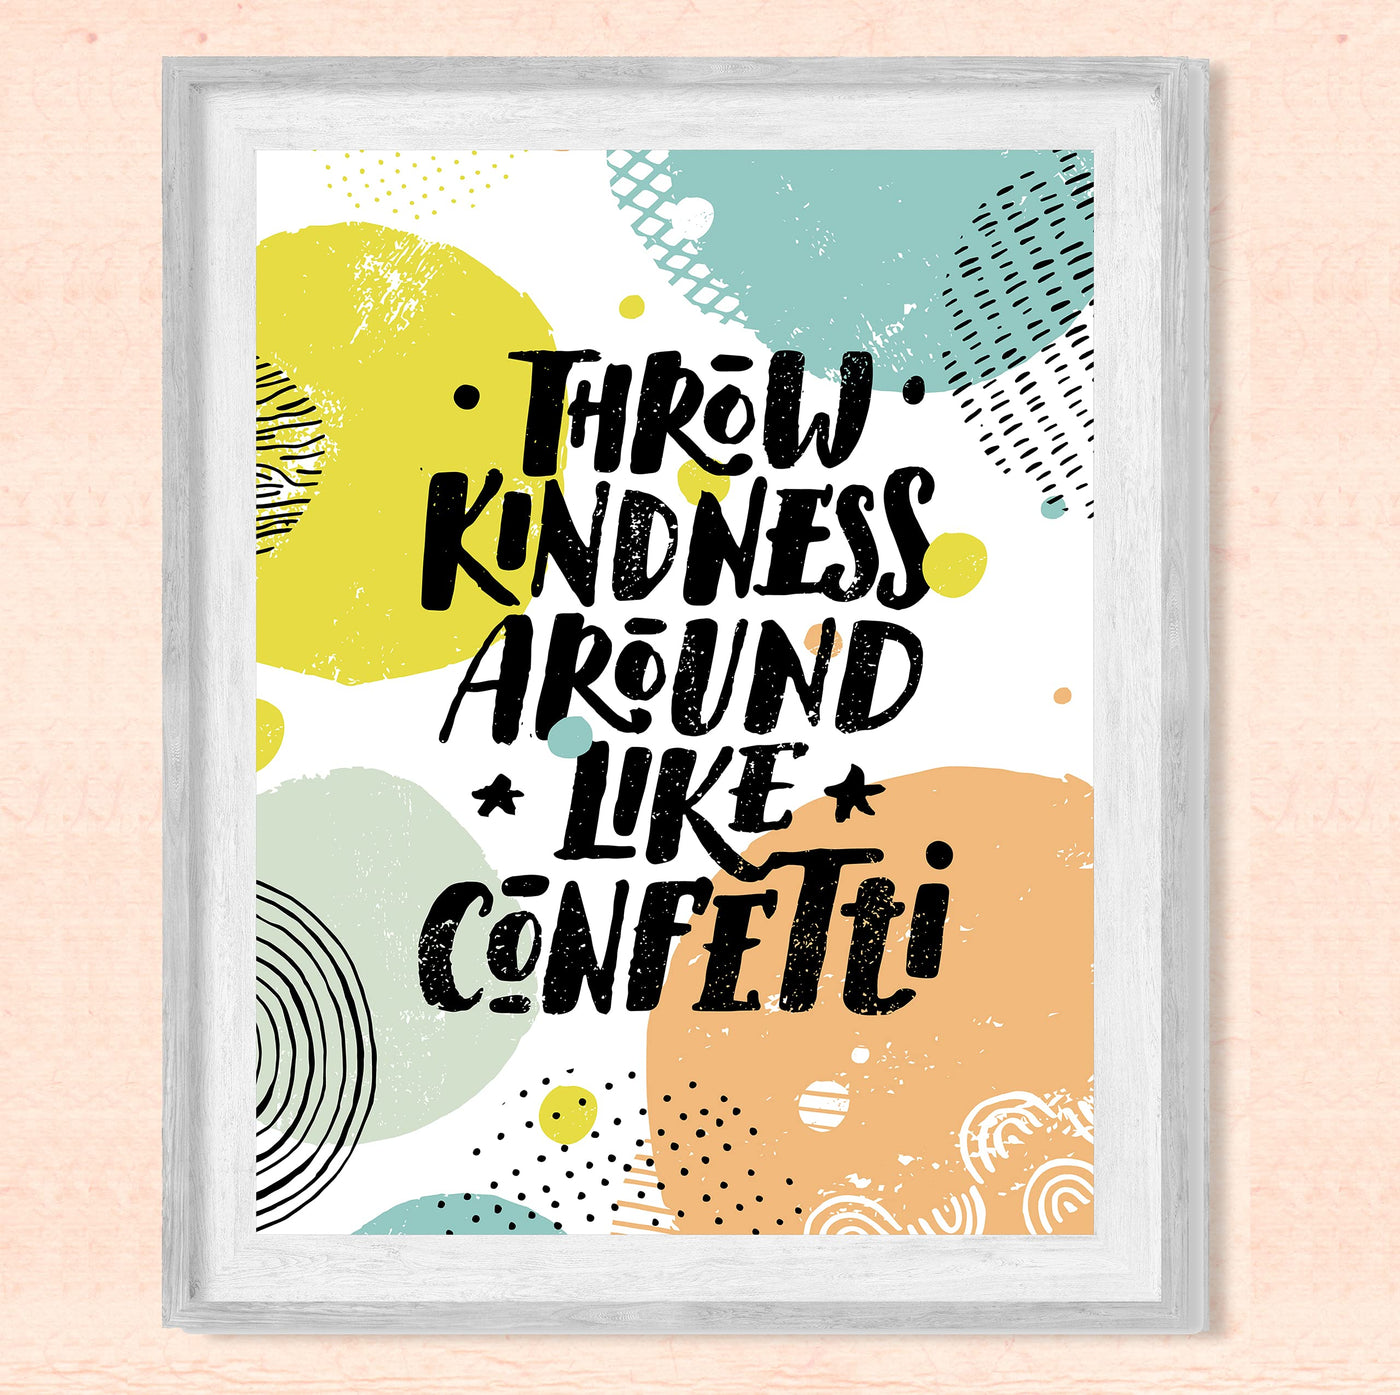 Throw Kindness Around Like Confetti-Inspirational Quotes Wall Art-8 x 10" Positive Classroom Wall Print-Ready to Frame. Modern Typographic Home-Office-School-Work Decor. Great Motivational Gift!!